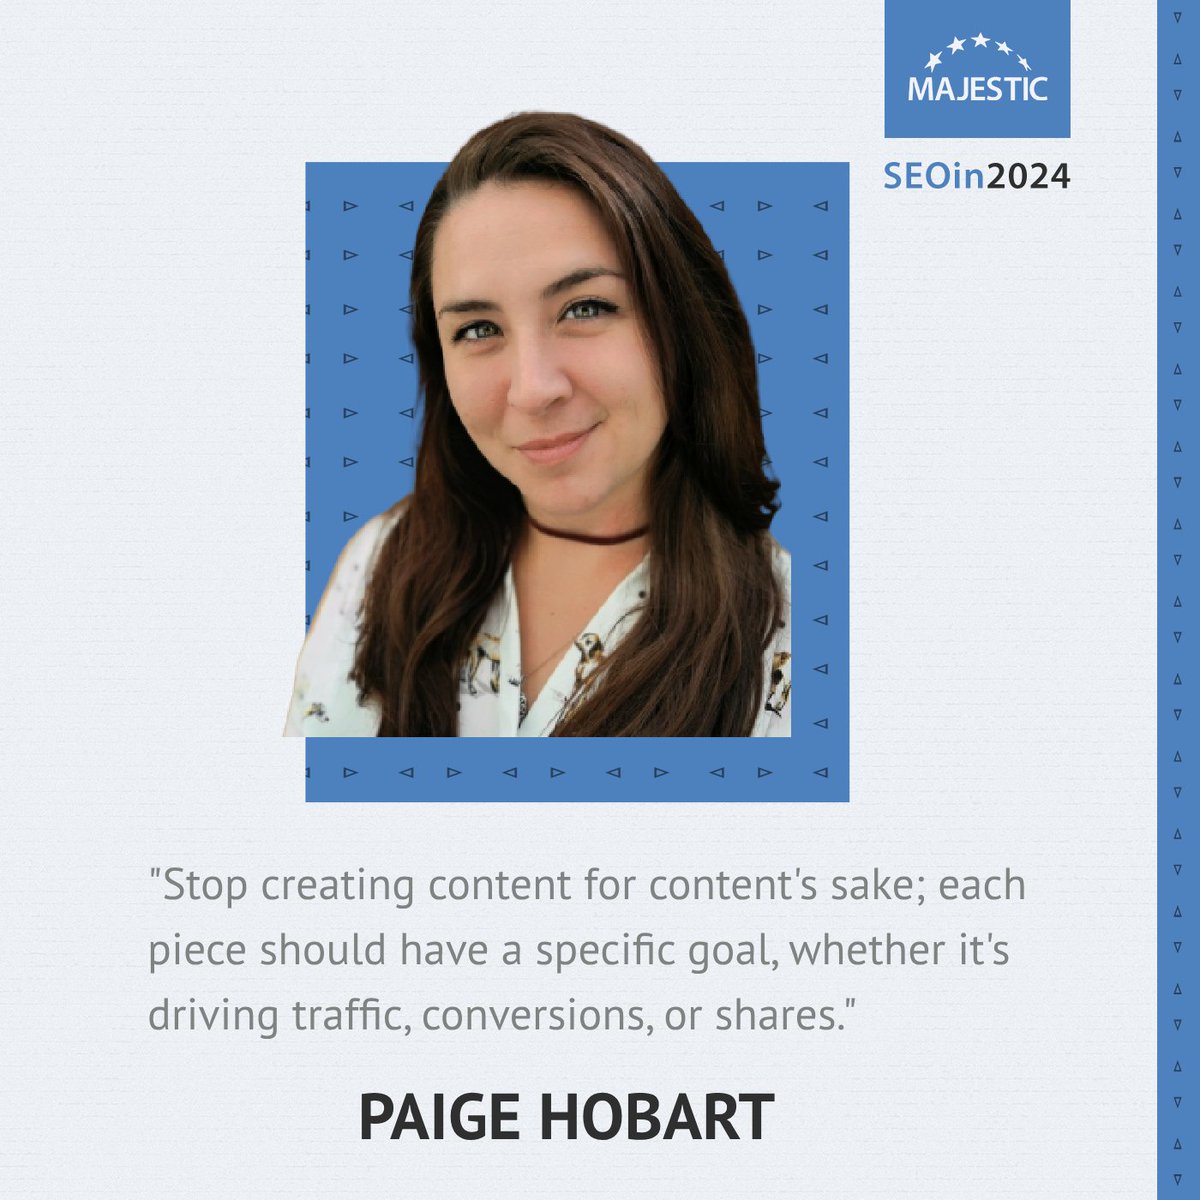 Paige Hobart's (@PaigeHobart) wisdom on content creation: Ditch the quantity-over-quality mindset! Instead, every piece should be a strategic powerhouse, whether boosting traffic, driving conversions, or sparking shares. maj.to/3P69n0H